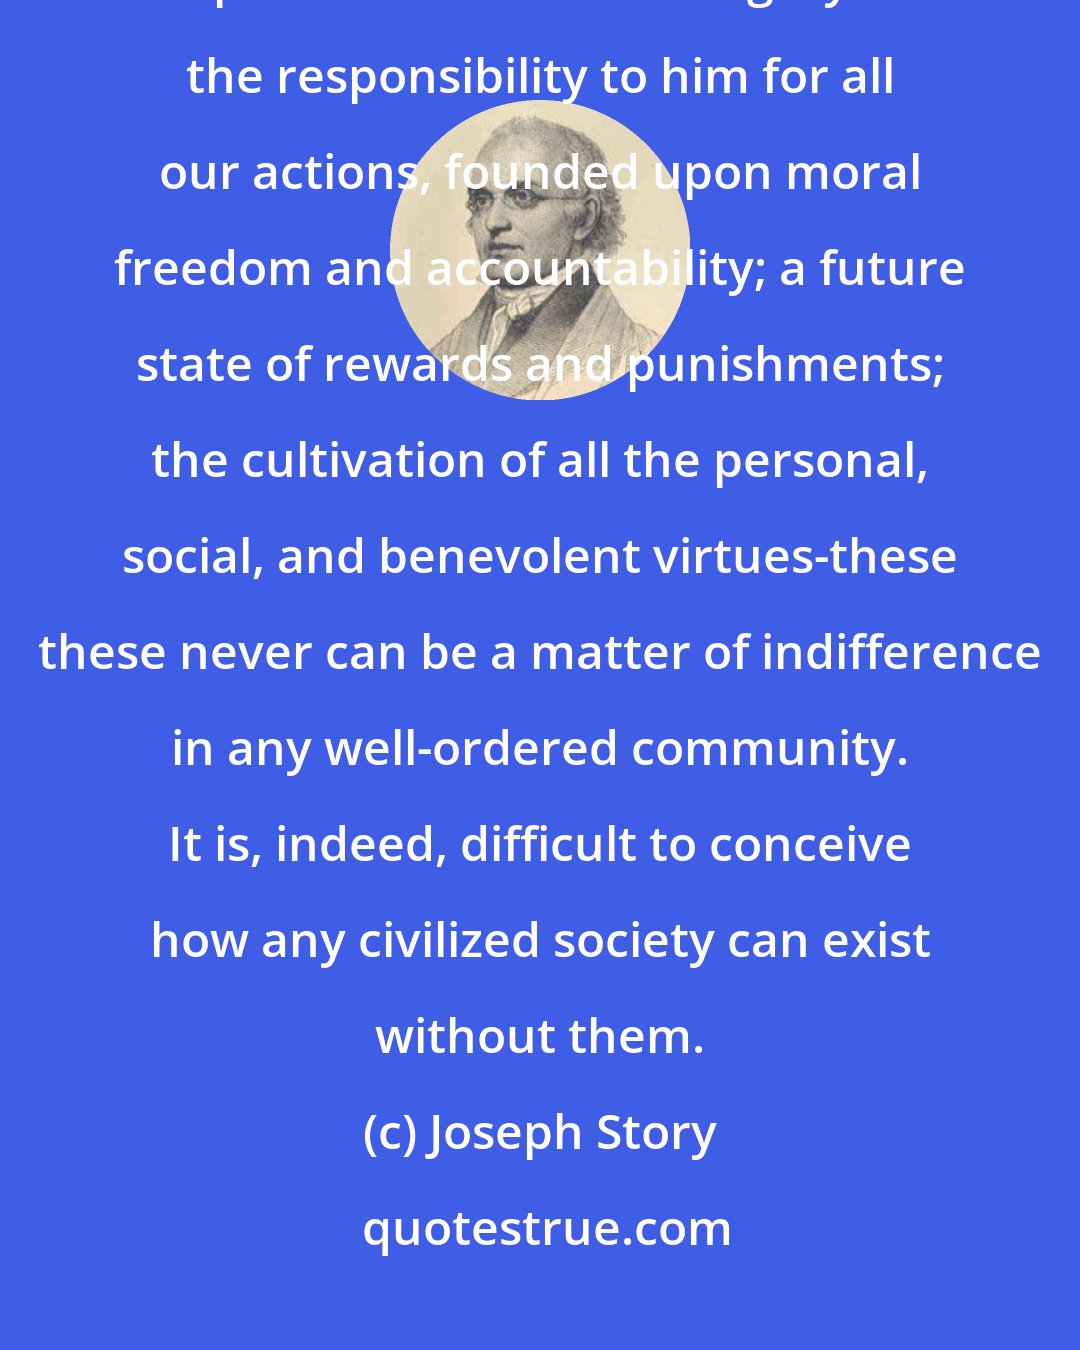 Joseph Story: The promulgation of the great doctrines of religion, the being, and attributes, and providence of one Almighty God: the responsibility to him for all our actions, founded upon moral freedom and accountability; a future state of rewards and punishments; the cultivation of all the personal, social, and benevolent virtues-these these never can be a matter of indifference in any well-ordered community. It is, indeed, difficult to conceive how any civilized society can exist without them.